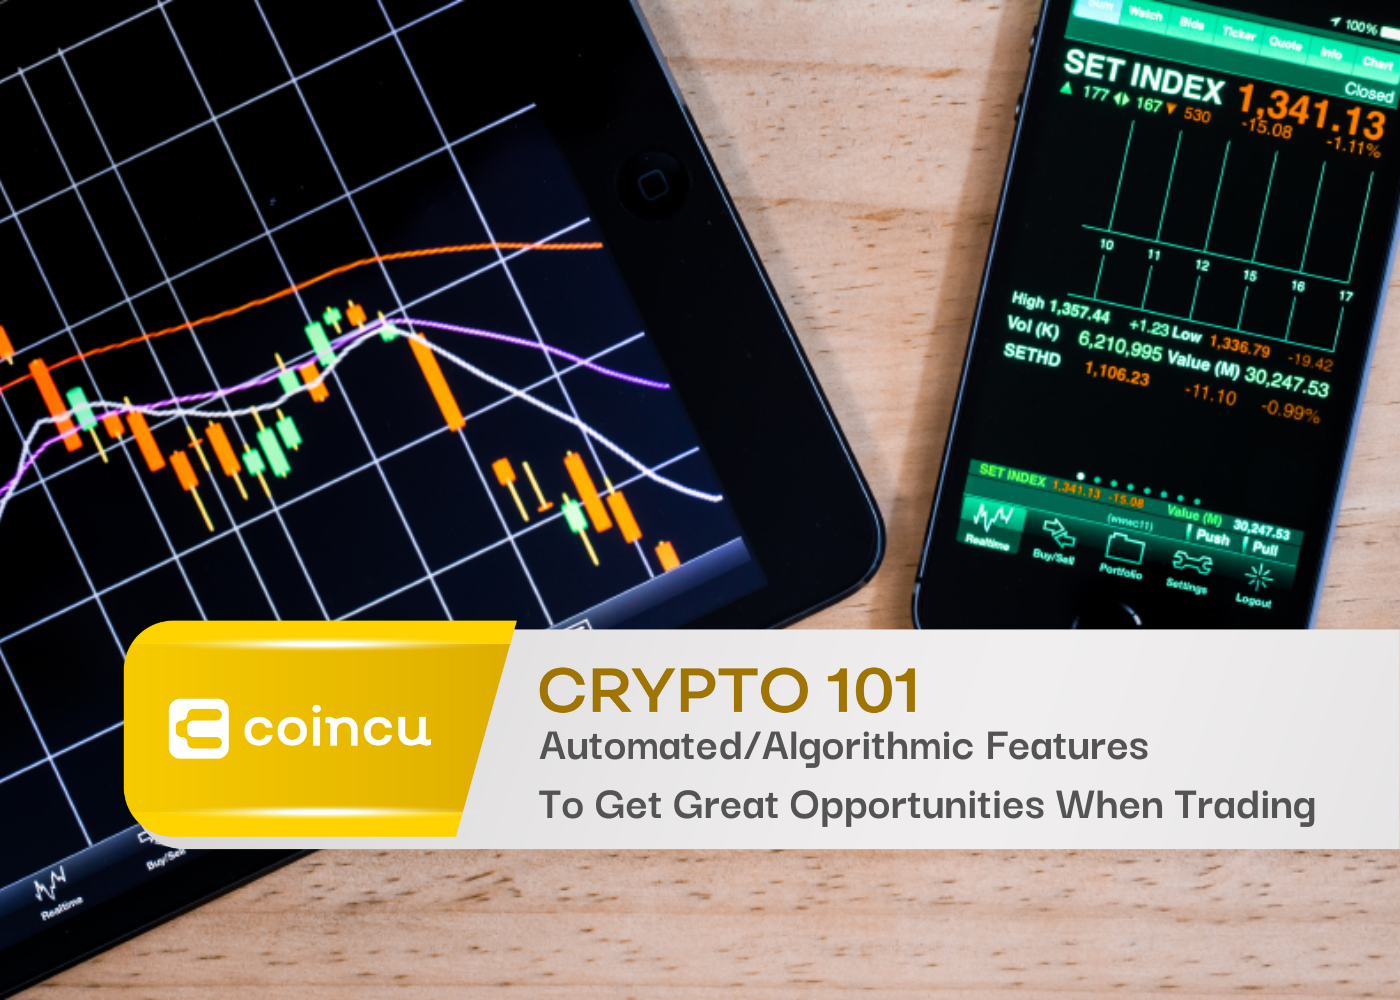 Automated/Algorithmic Features To Get Great Opportunities When Trading